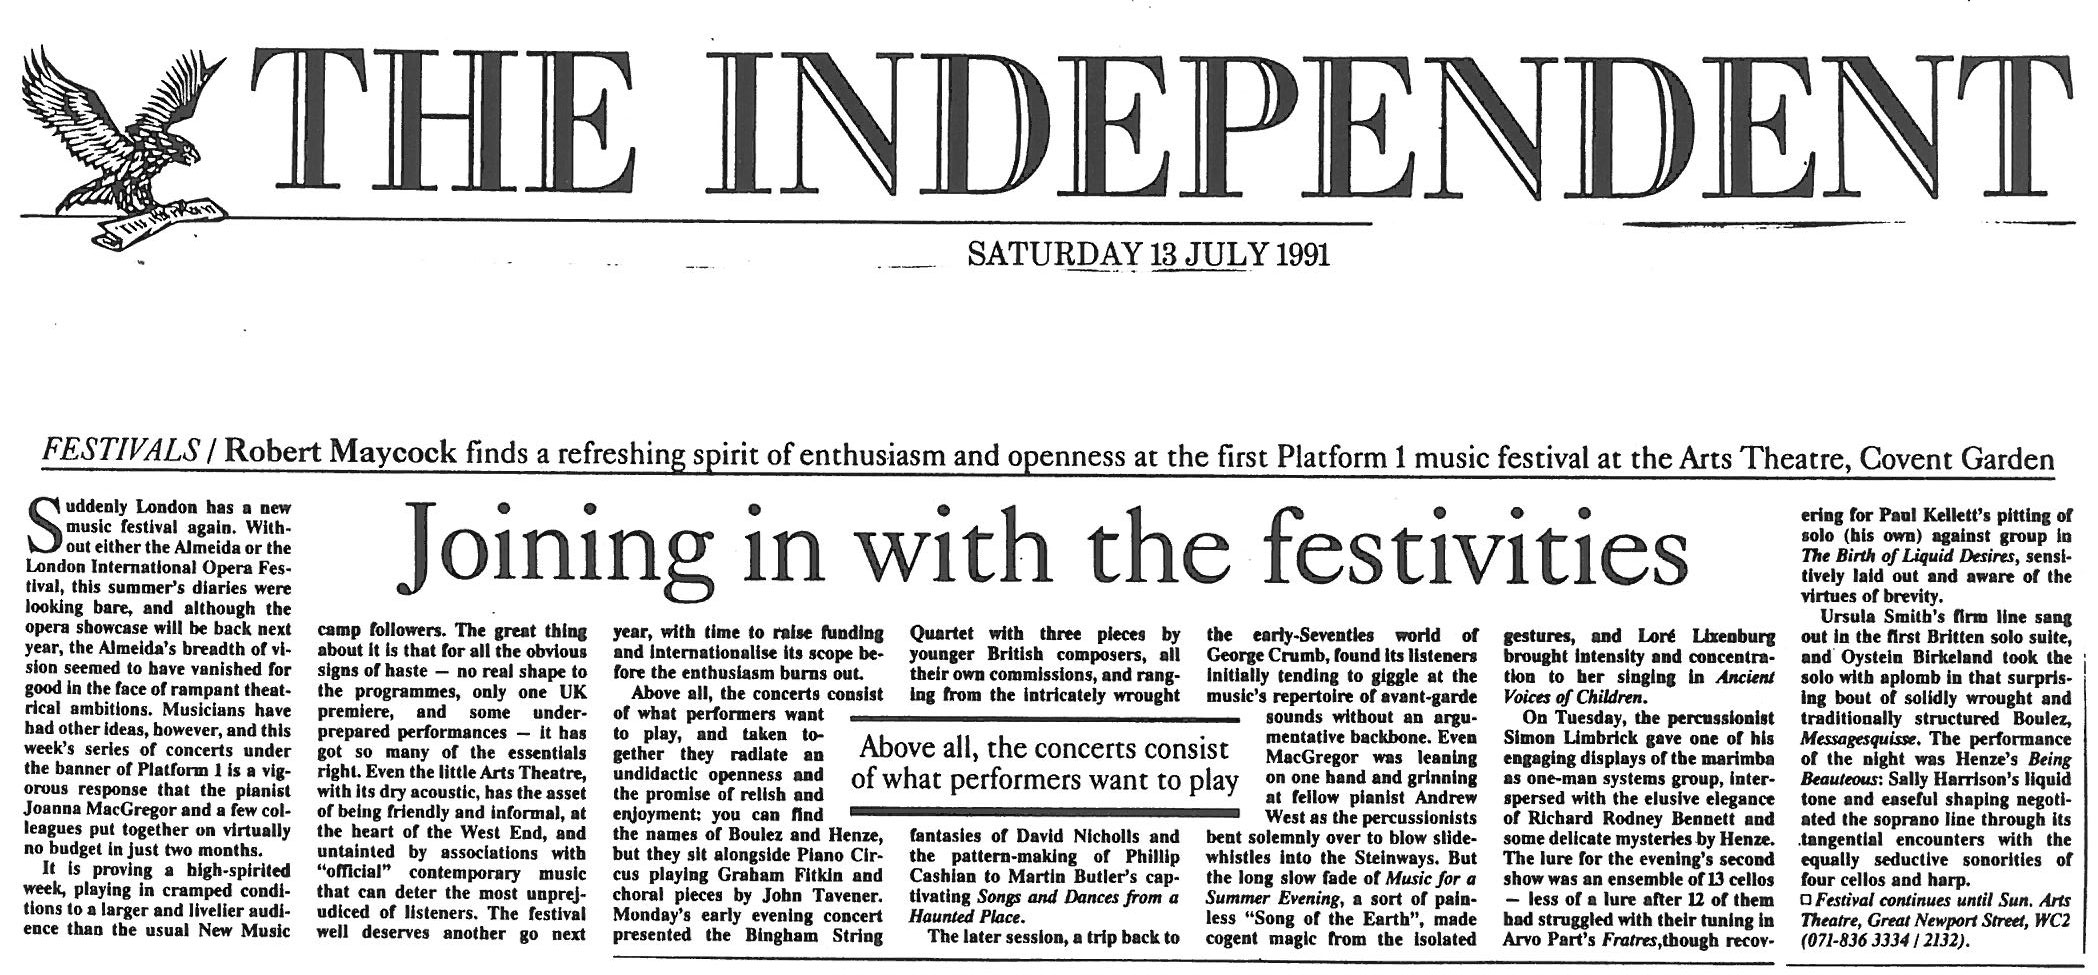 Review, 1991, The Independent